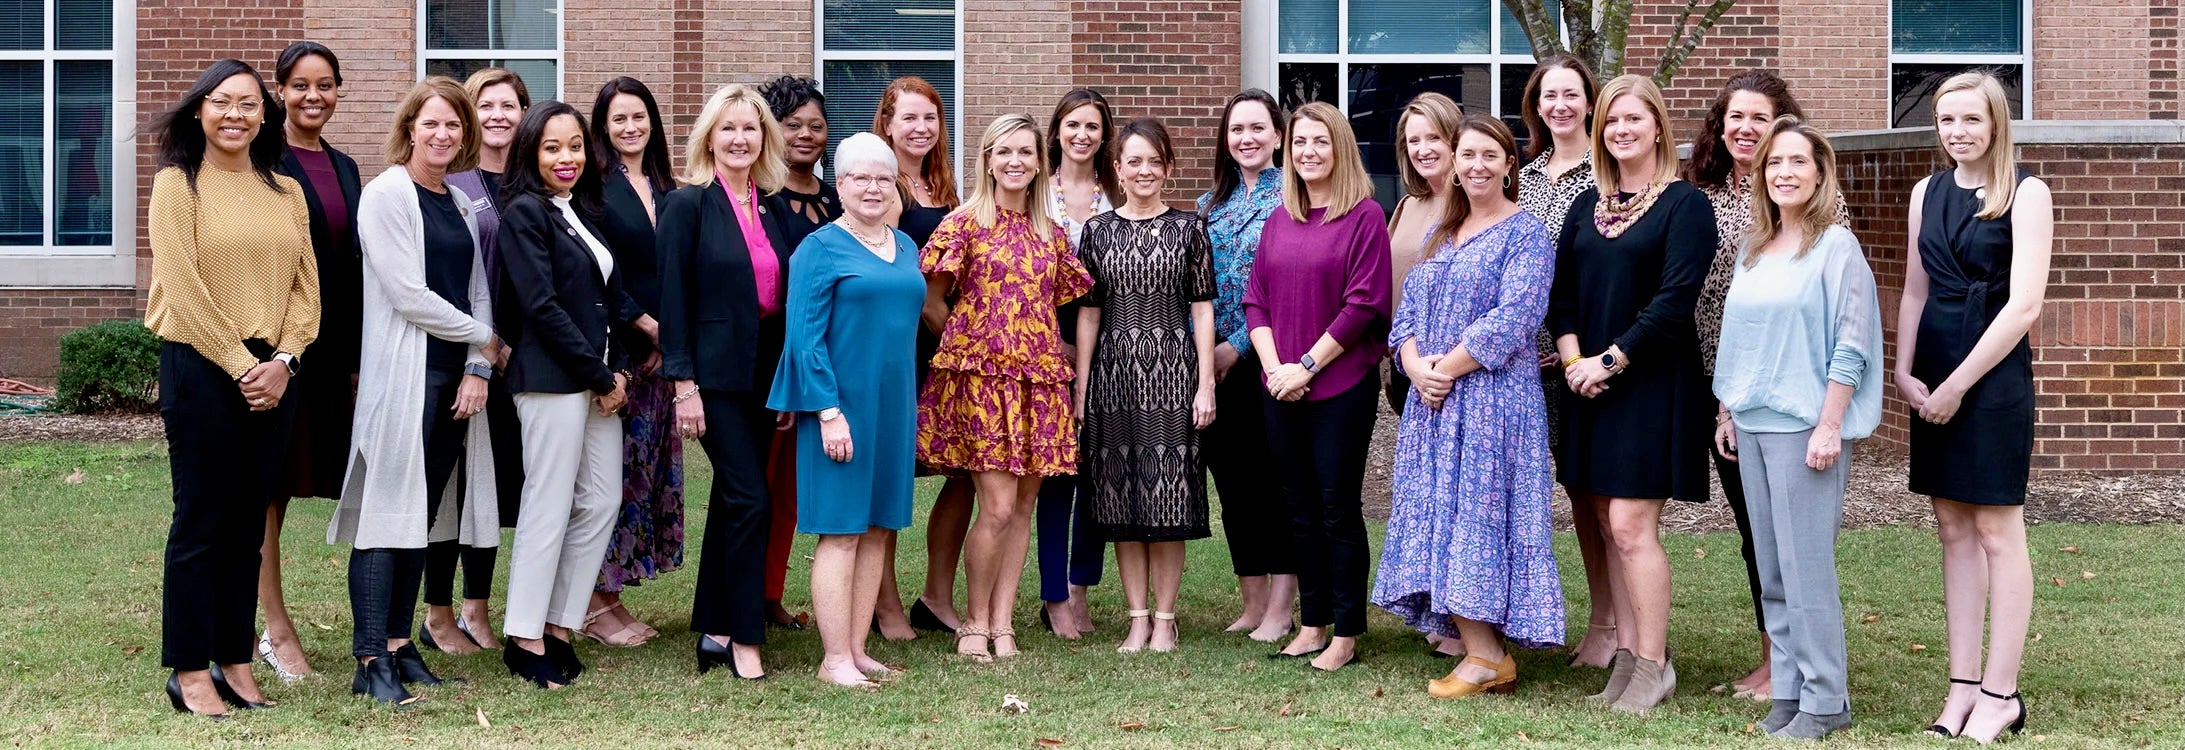 Members of the ECU Women's Roundtable pictured.